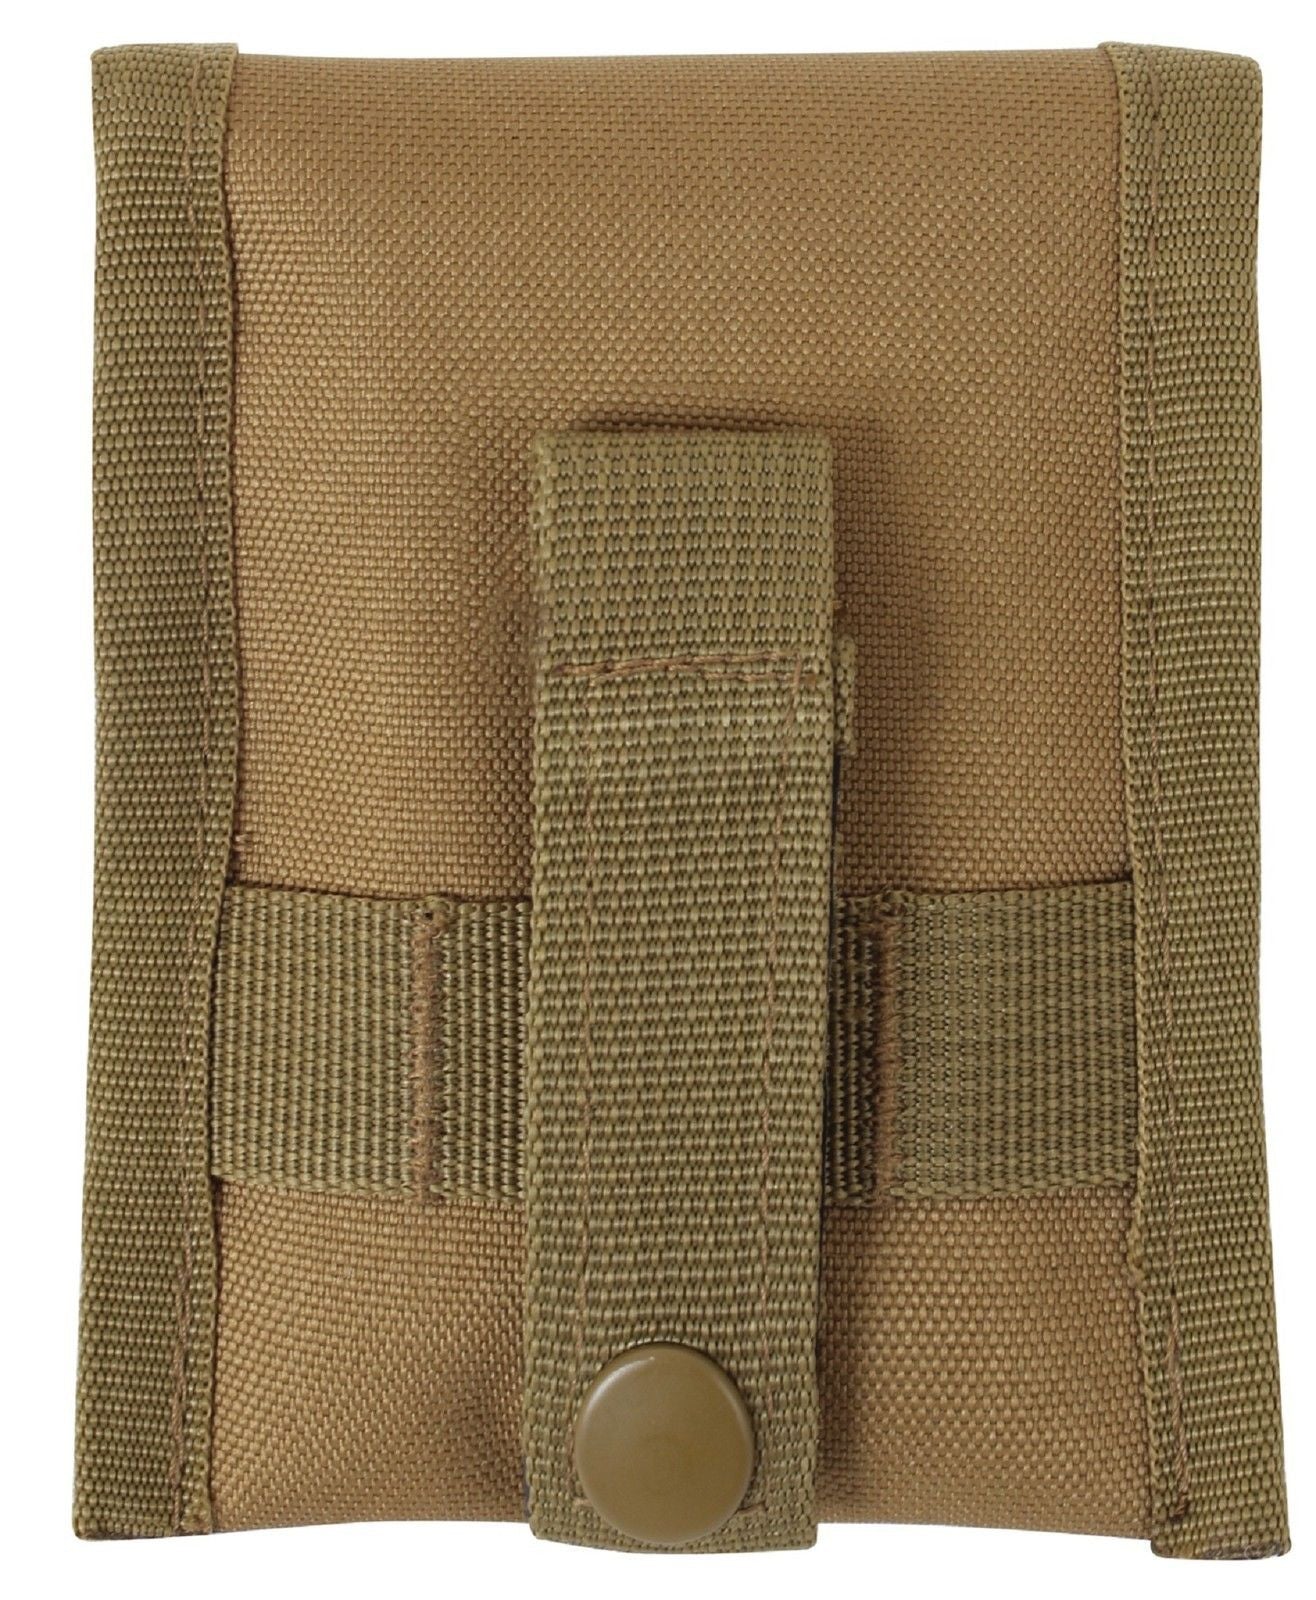 Coyote Brown MOLLE Compatible Compass Pouch 4.5"x5" Snap Closure Tactical Pouch